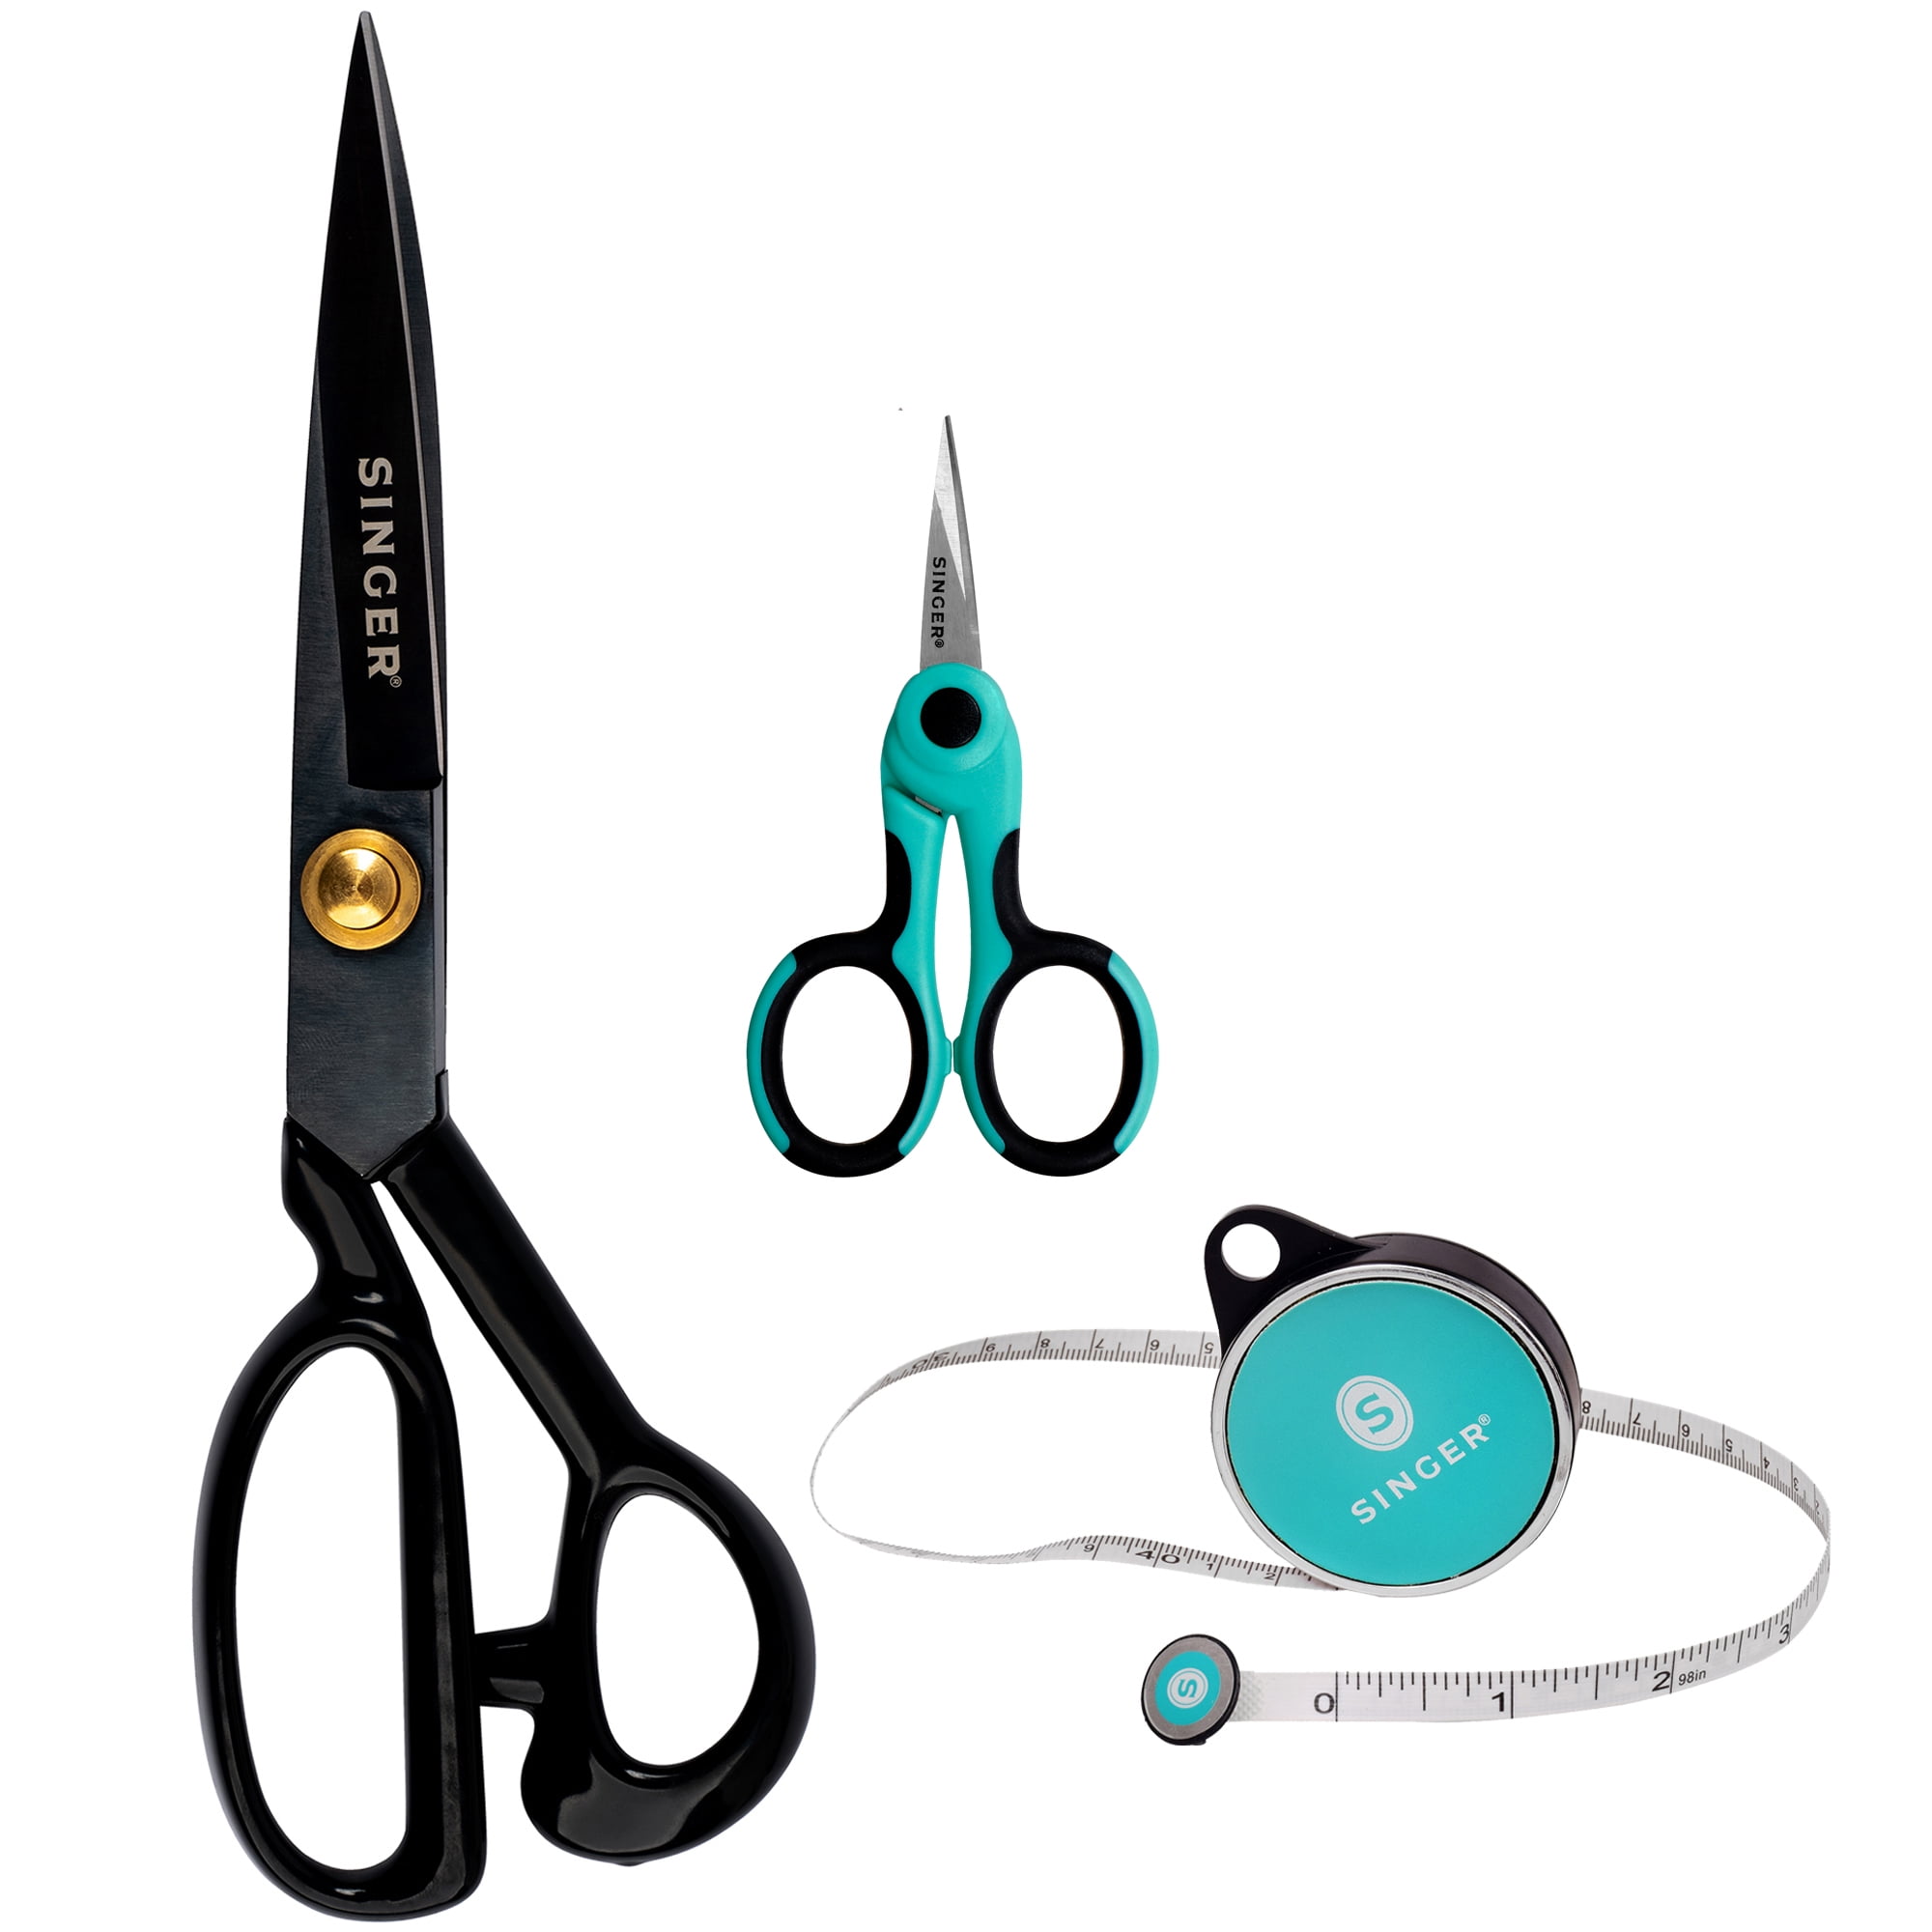 Glexal Small Embroidery Scissors with Cover -Cute and Comfortable handles  with Sturdy and Sharp Tips for Precise Cutting, Perfect Size for Keeping in